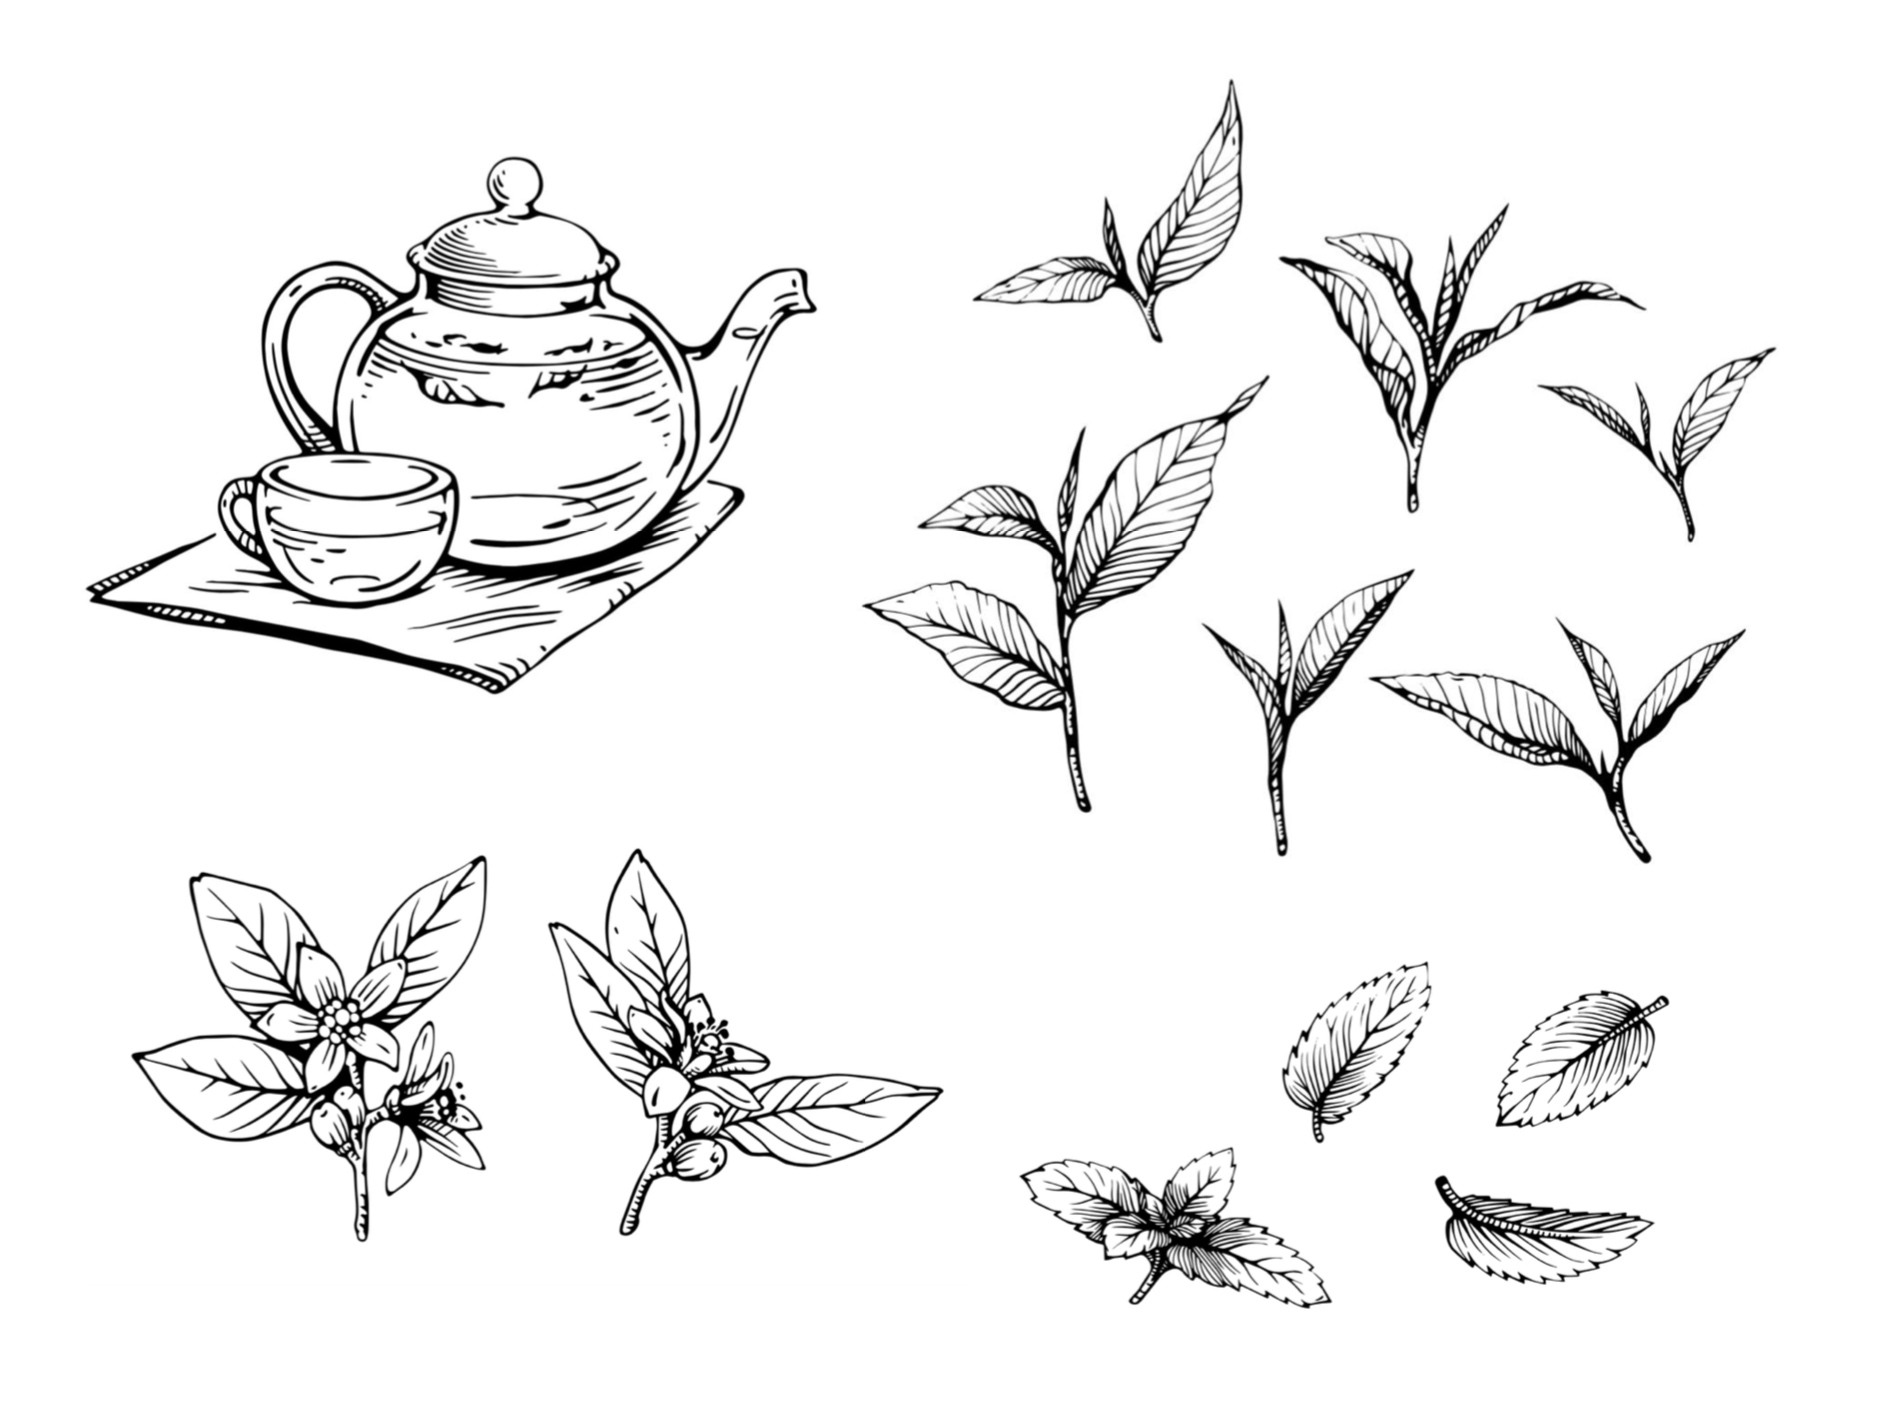 Technical drawings for tea packages